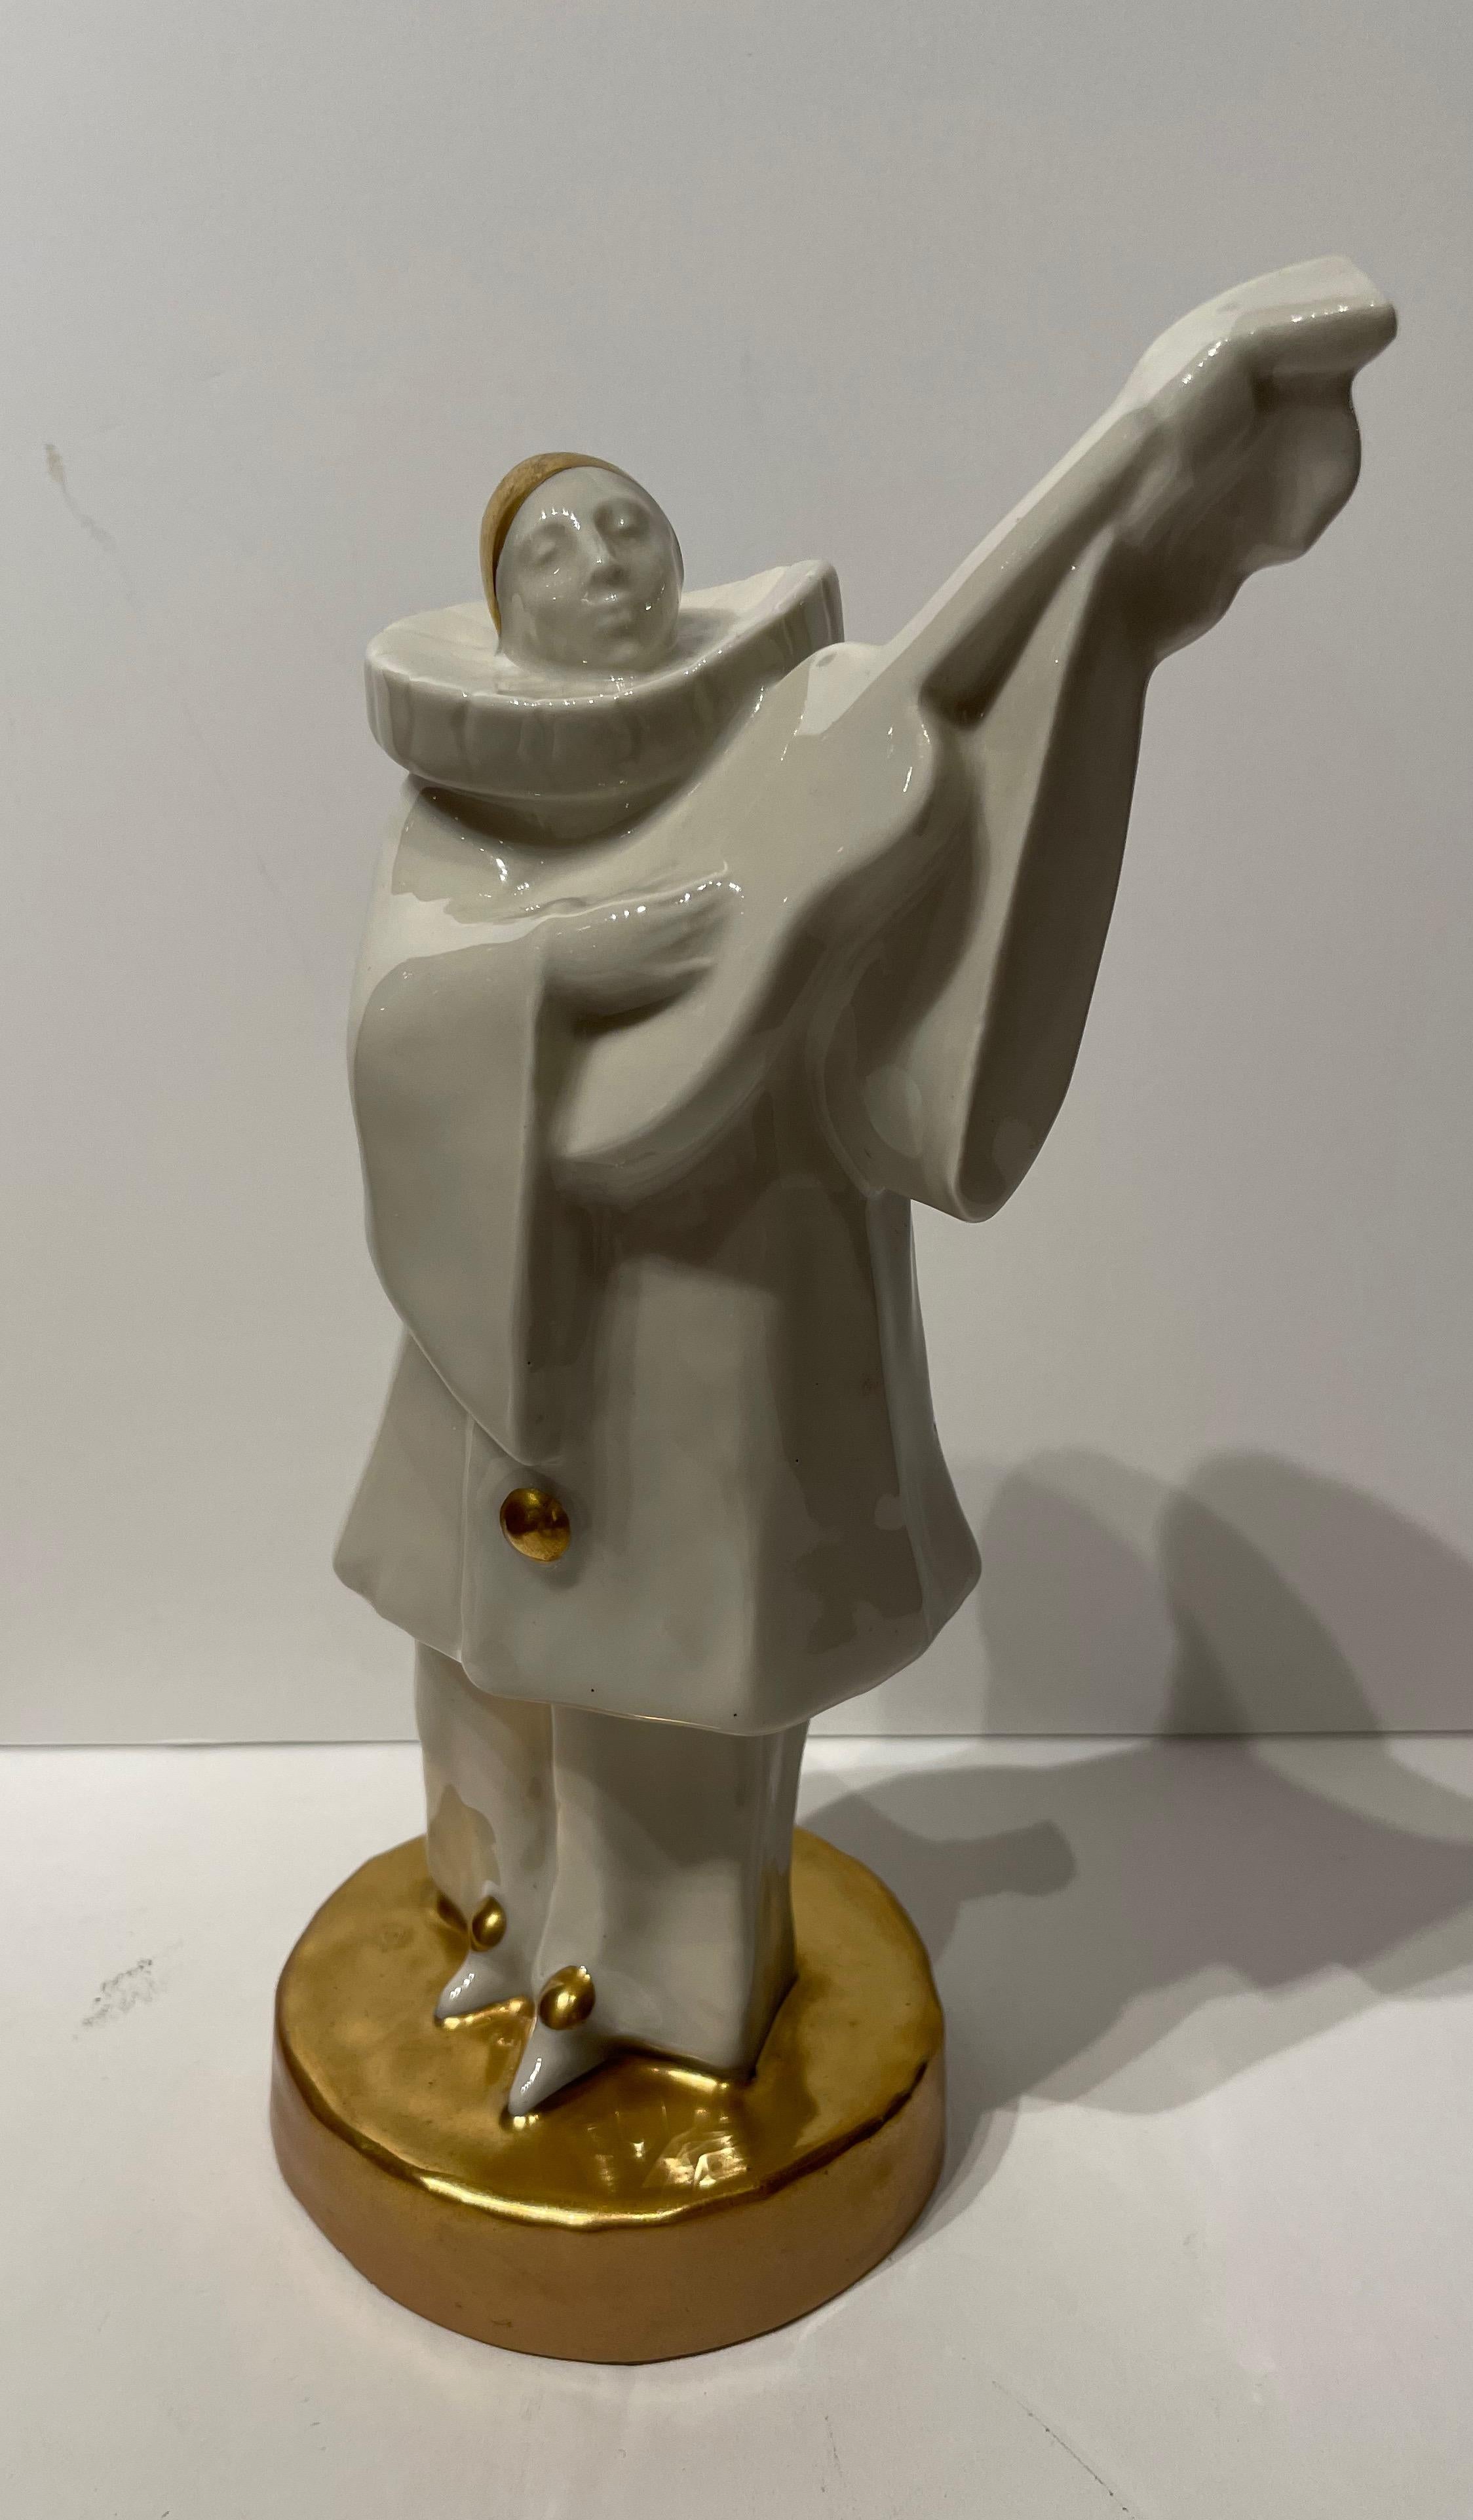 Edouard Marcel Sandoz Porcelain Musician Guitarist Statue. Figure “Pierrot Musicien”, circa 1917. Hard-paste porcelain with a white glaze, and painted gold. Signed to the base. Théodore Haviland & M. Sandoz monogram. For a similar example see the